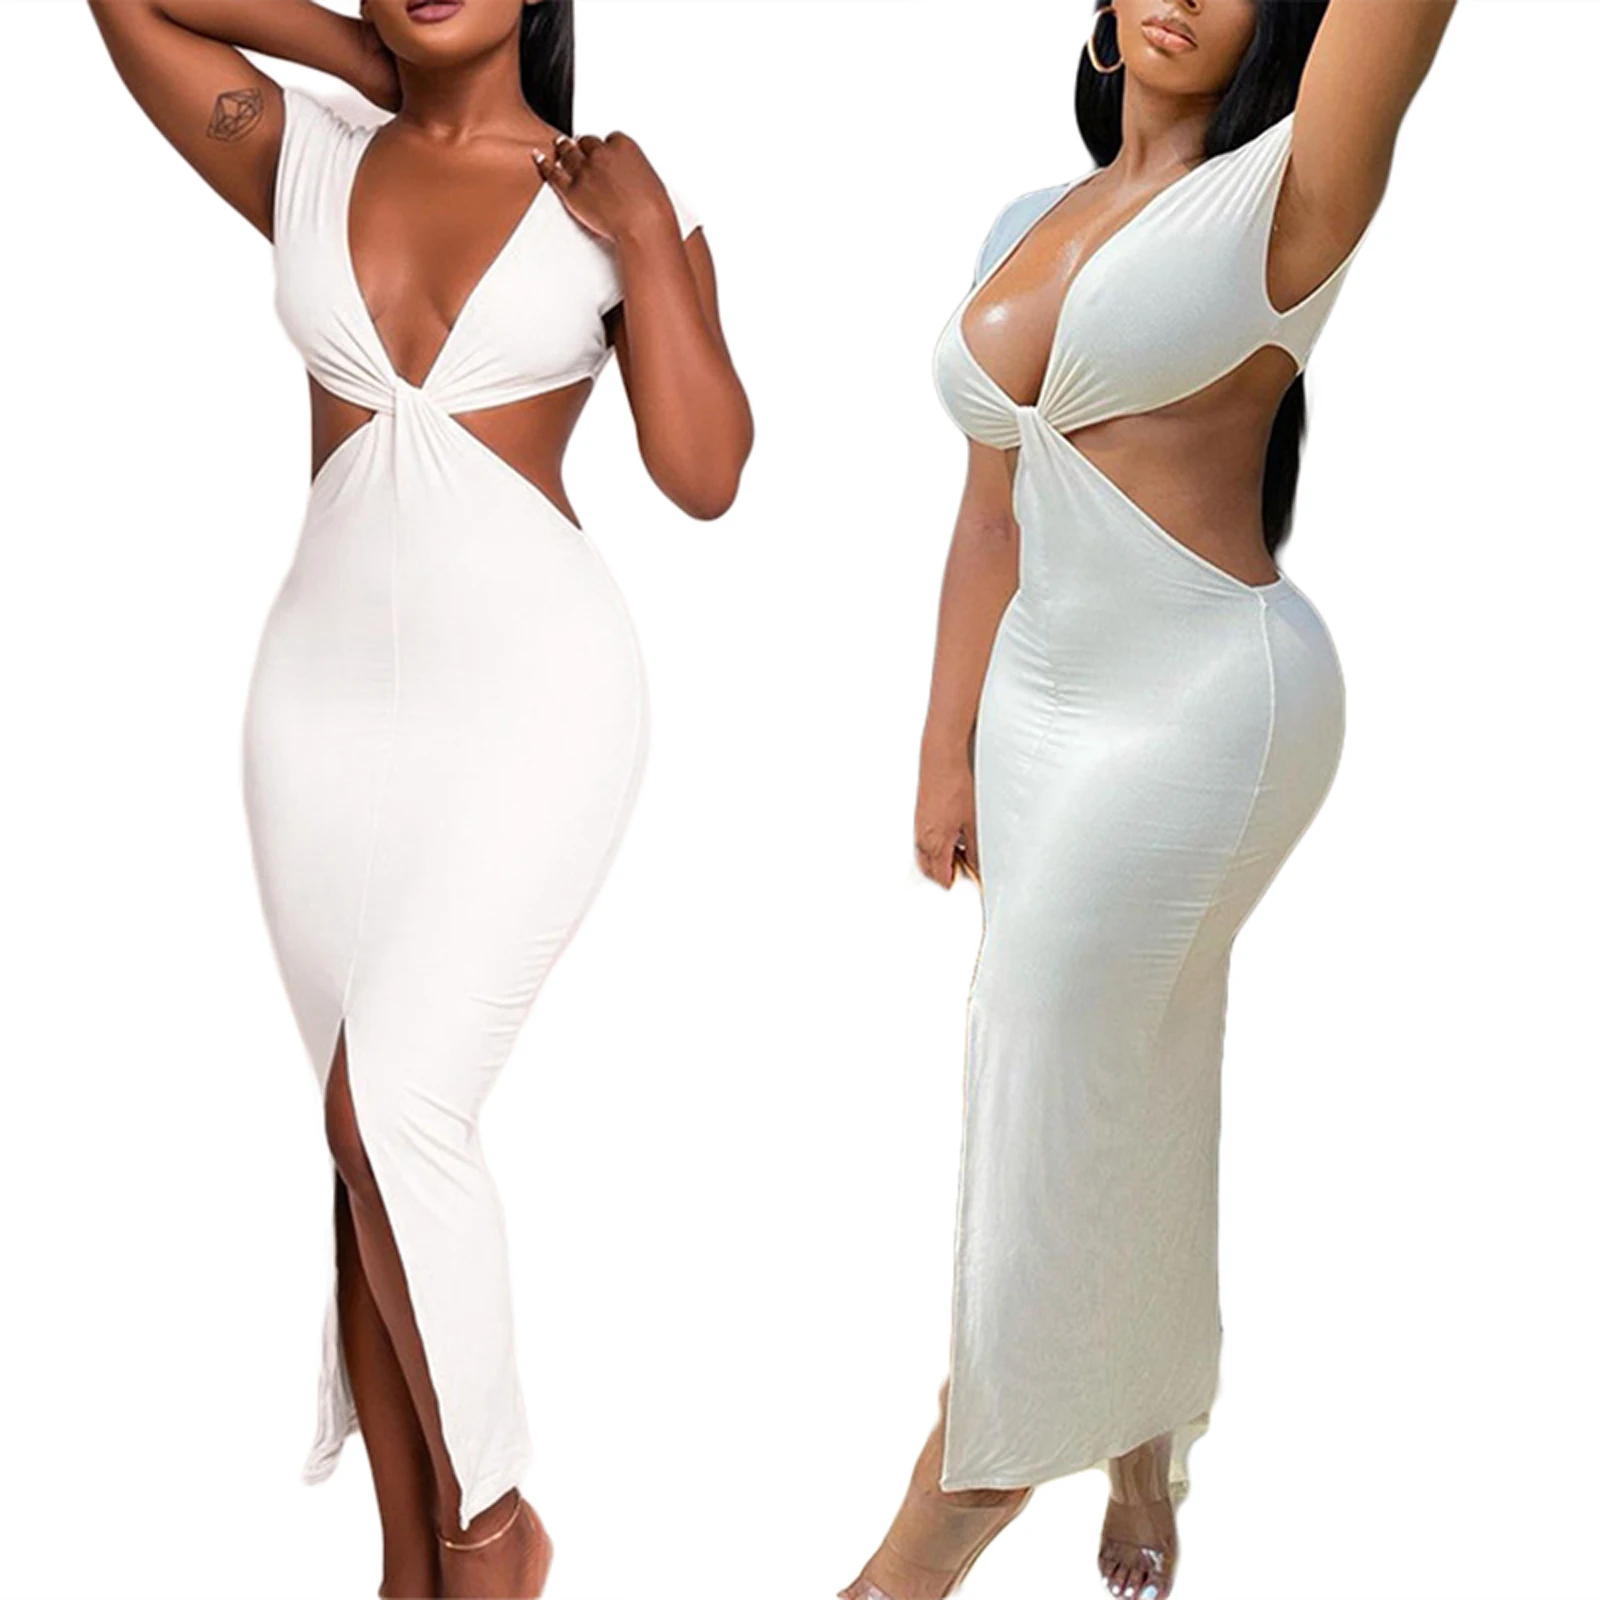 

Women Sexy Sheath Dress, Adults Solid Color V-neck Short Sleeve Slit Cutout Women's Clothing